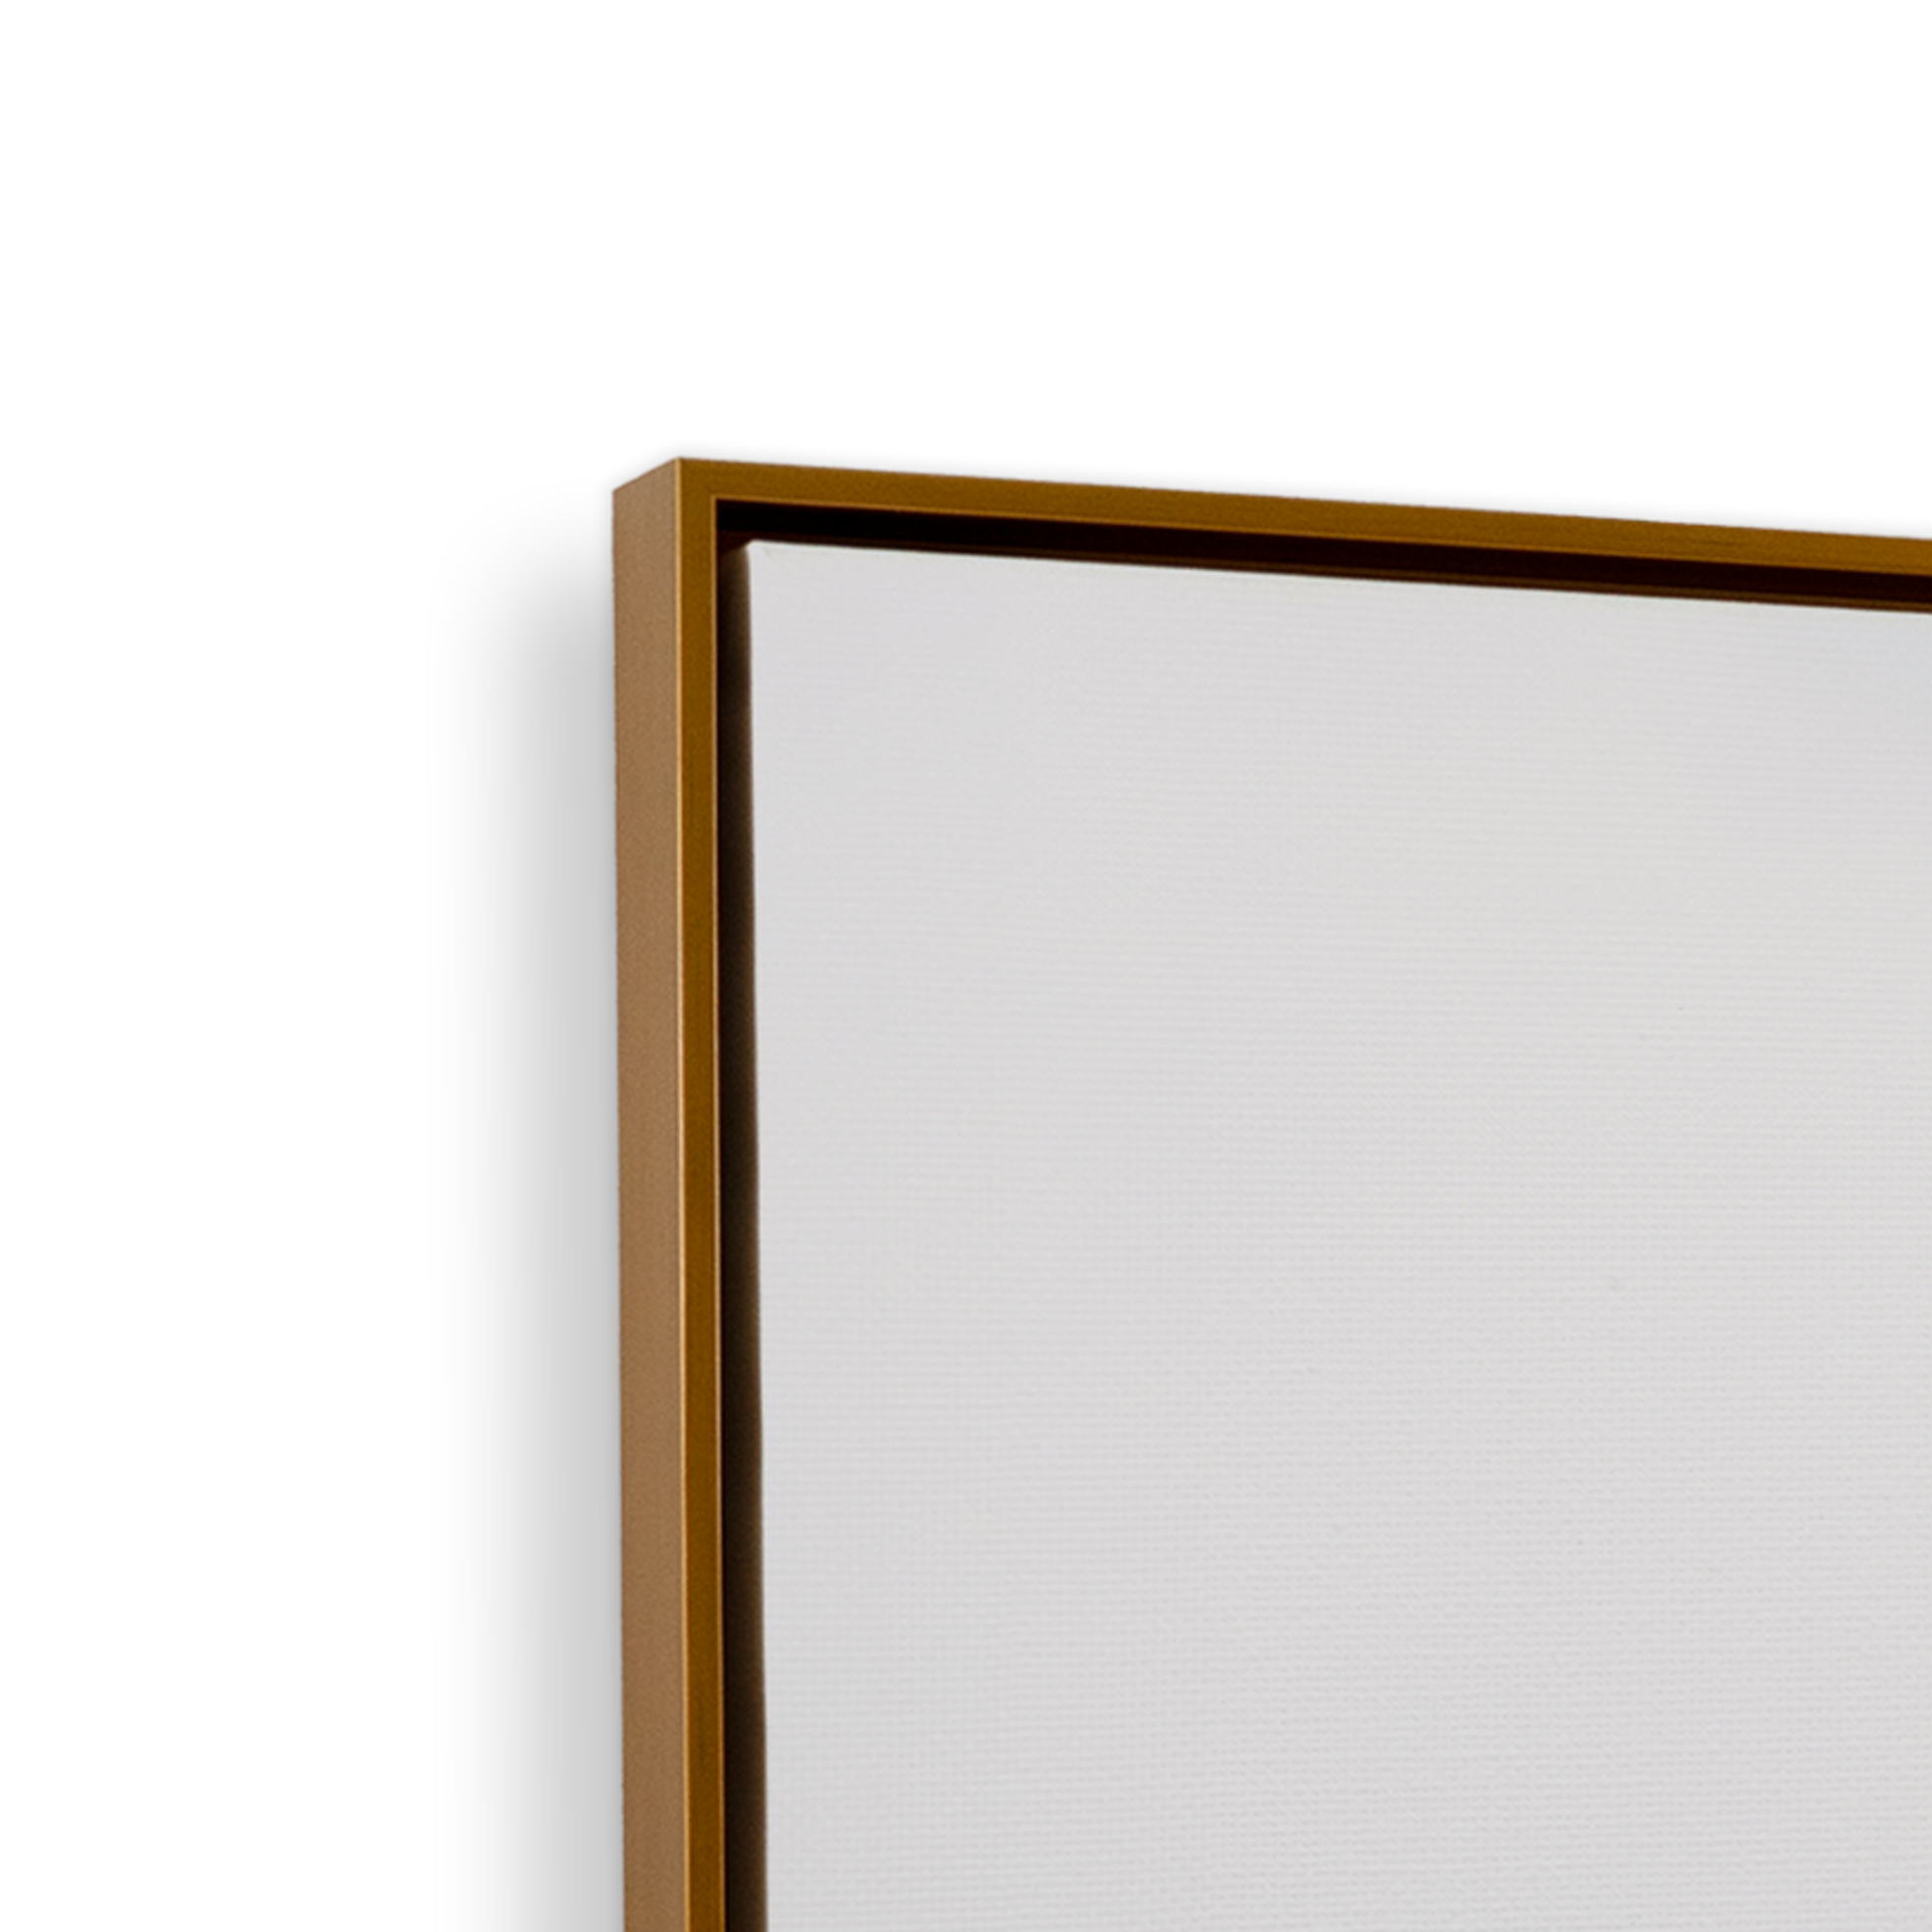 [color:Polished Gold], Picture of the corner of the frame